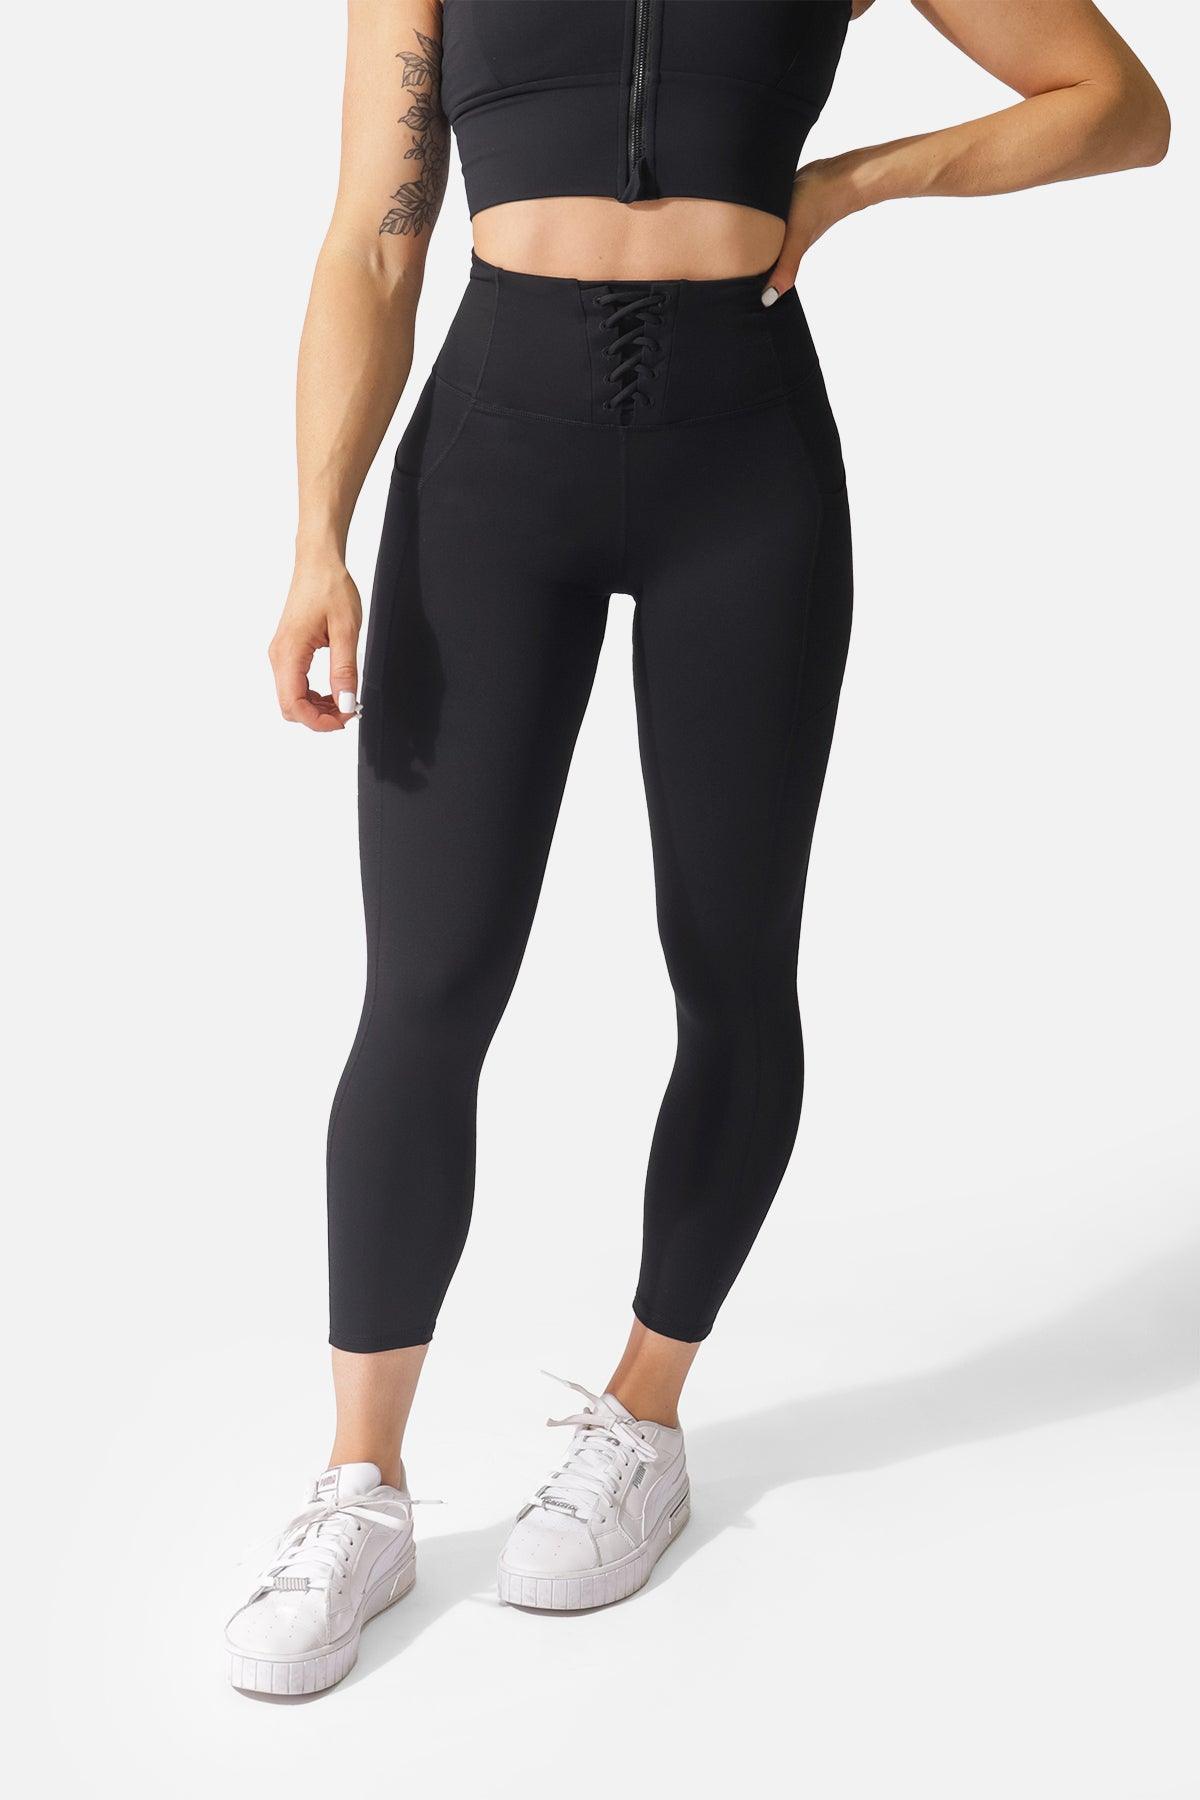 Lacey Pocket Leggings - Black - Jed North Canada